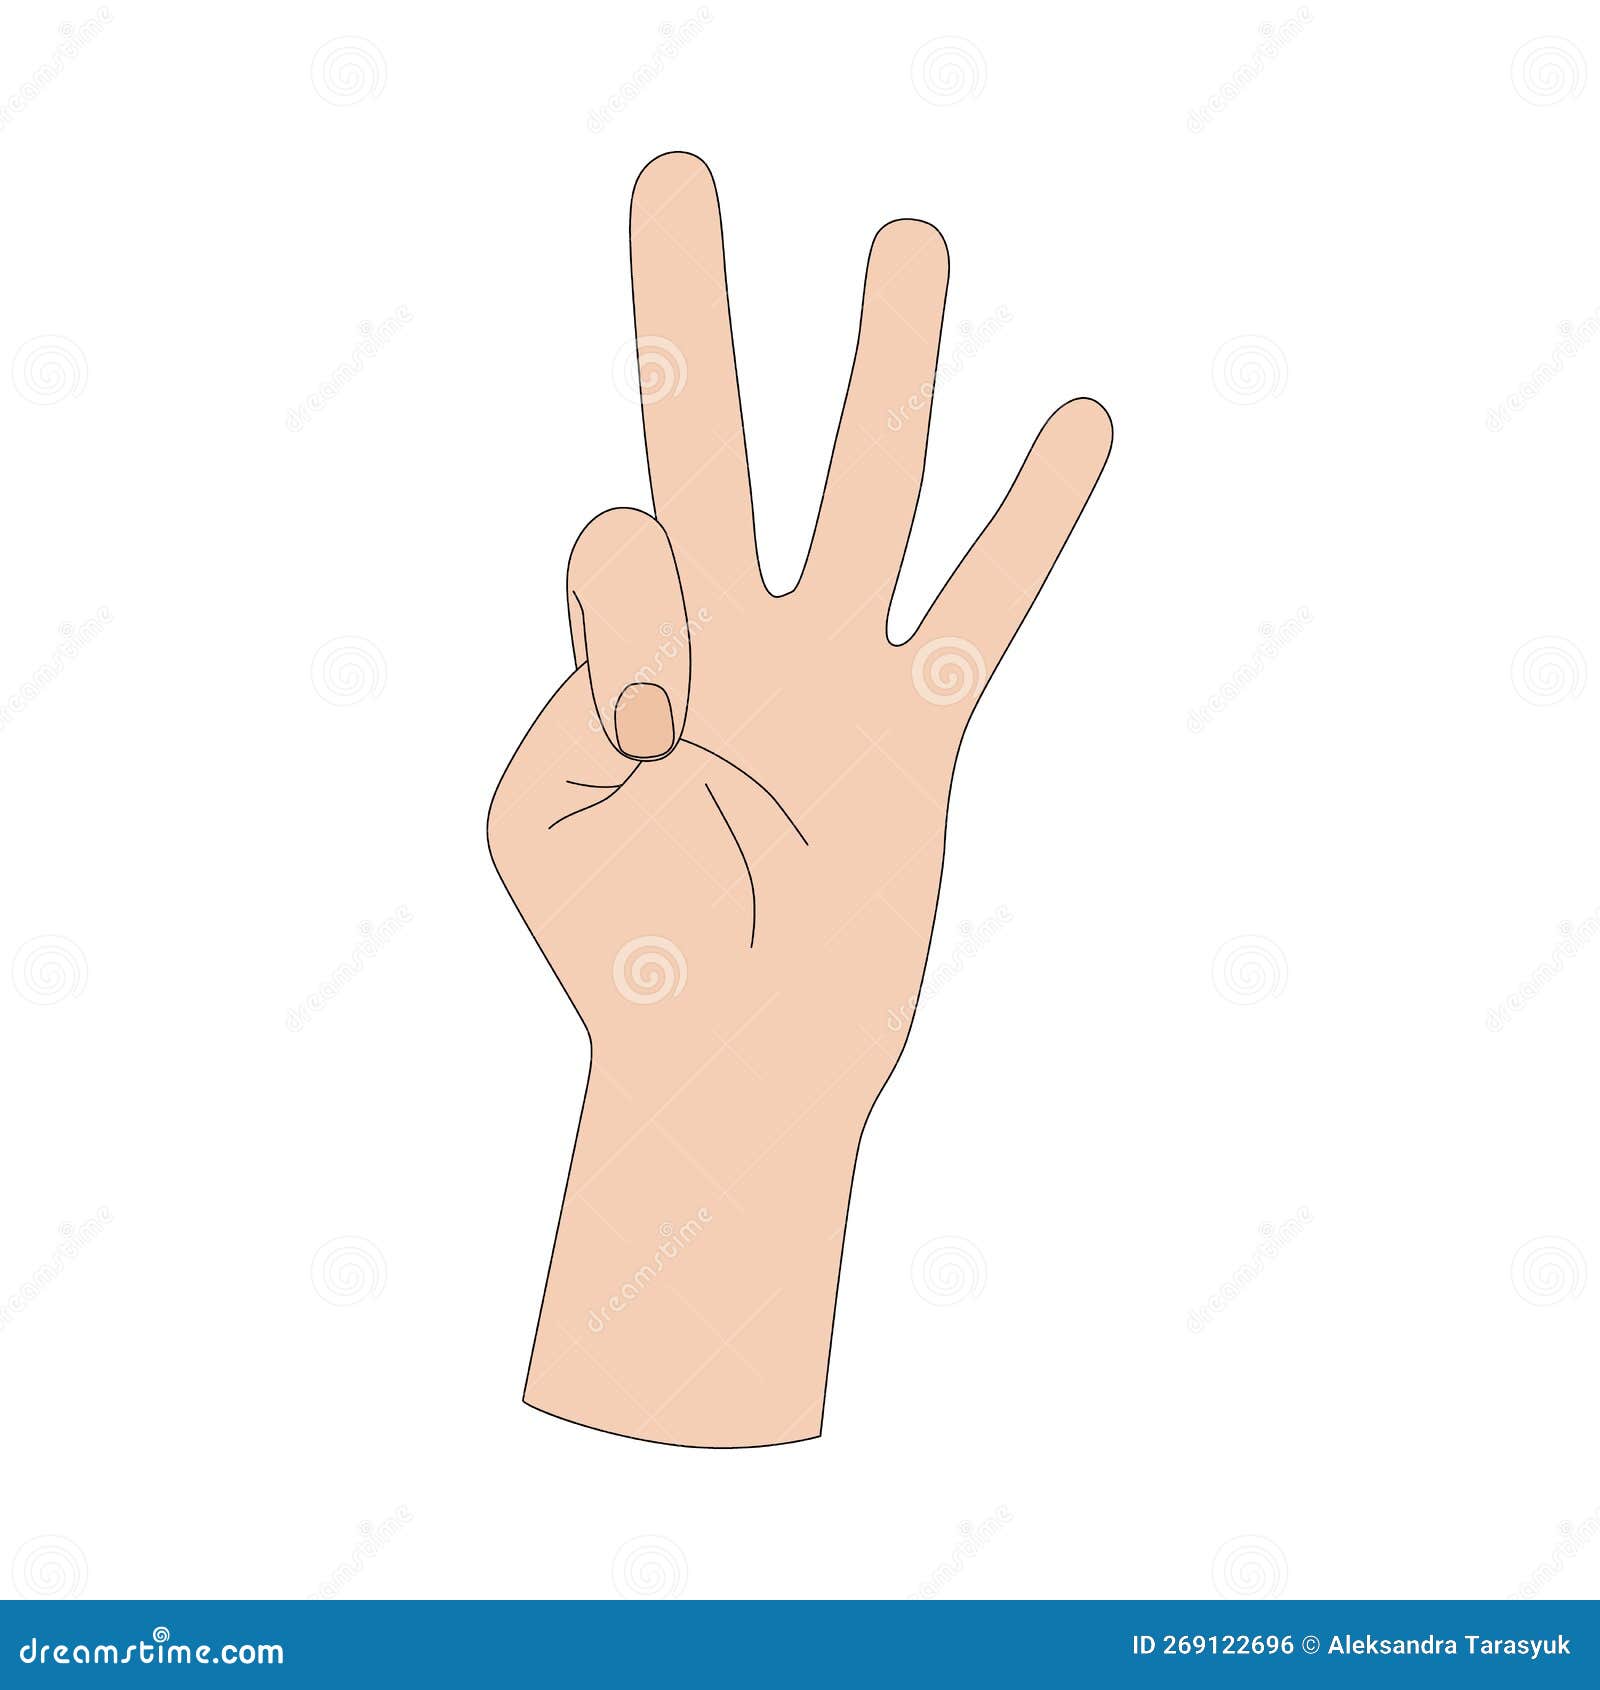 Hand Gesture Pointing Number One Sign Stock Vector - Illustration of  vector, closeup: 129793095